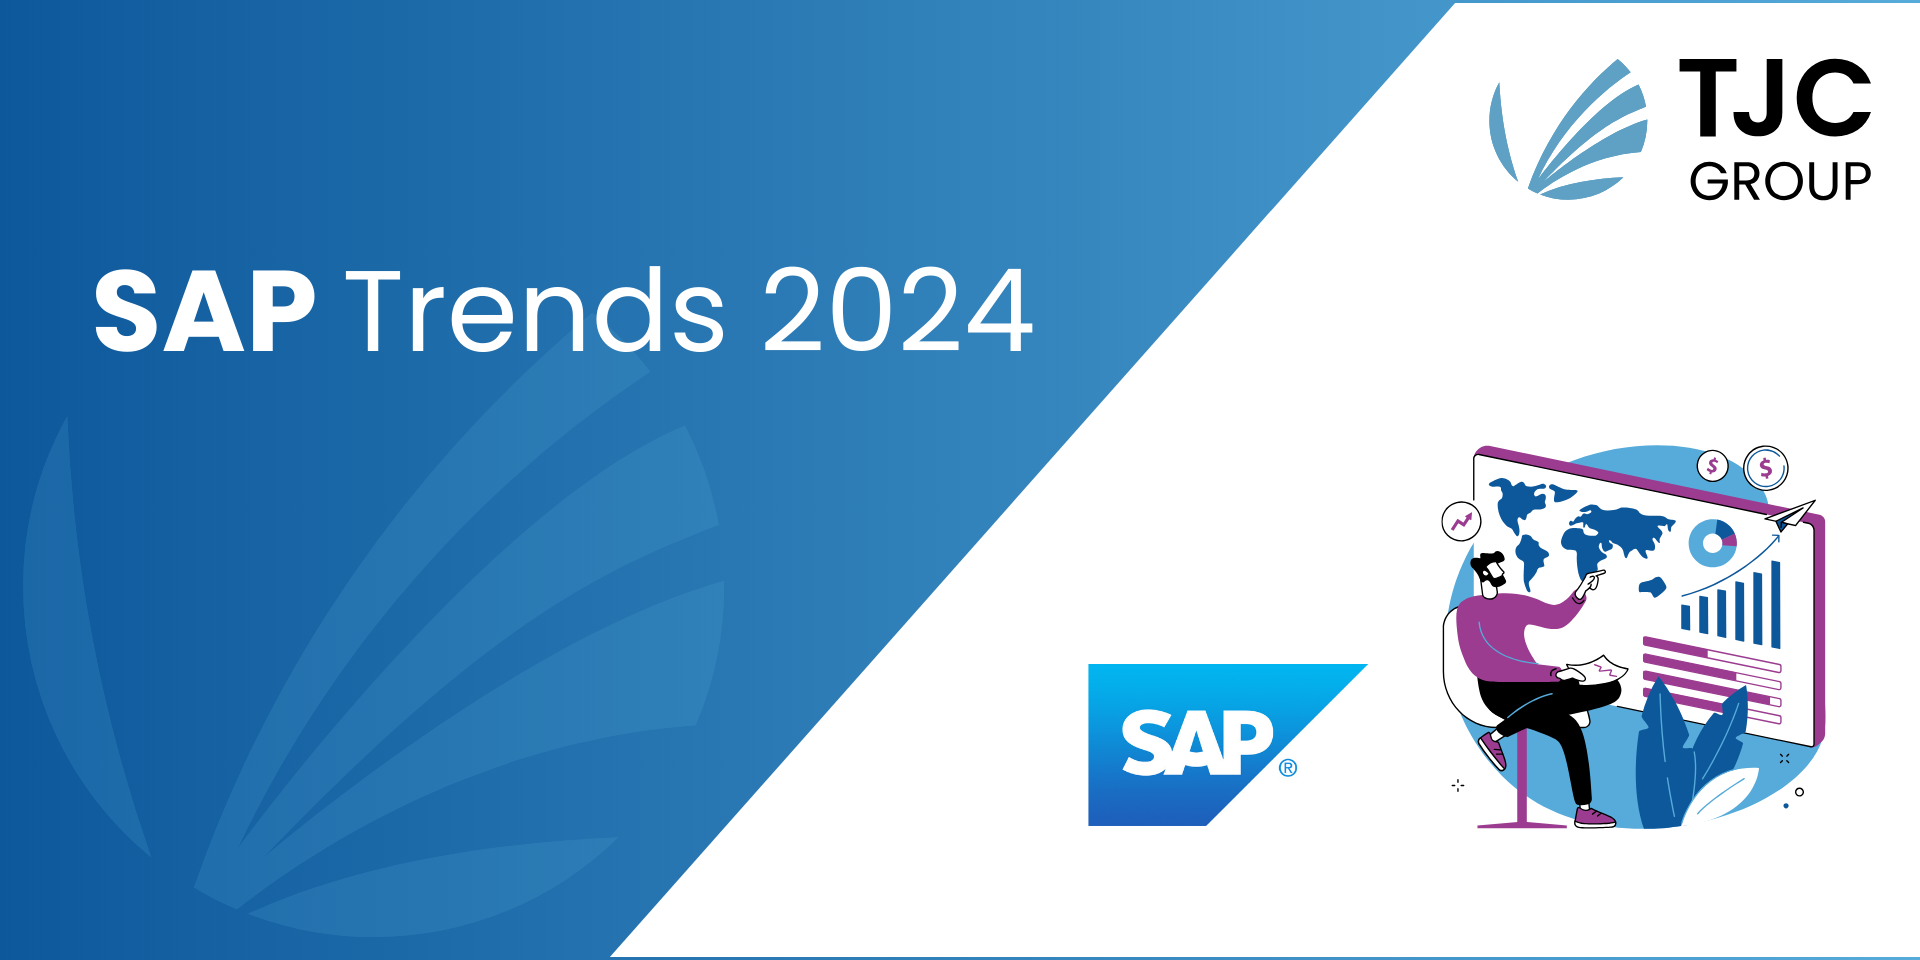 5 key SAP trends for 2024 – is your business ready?